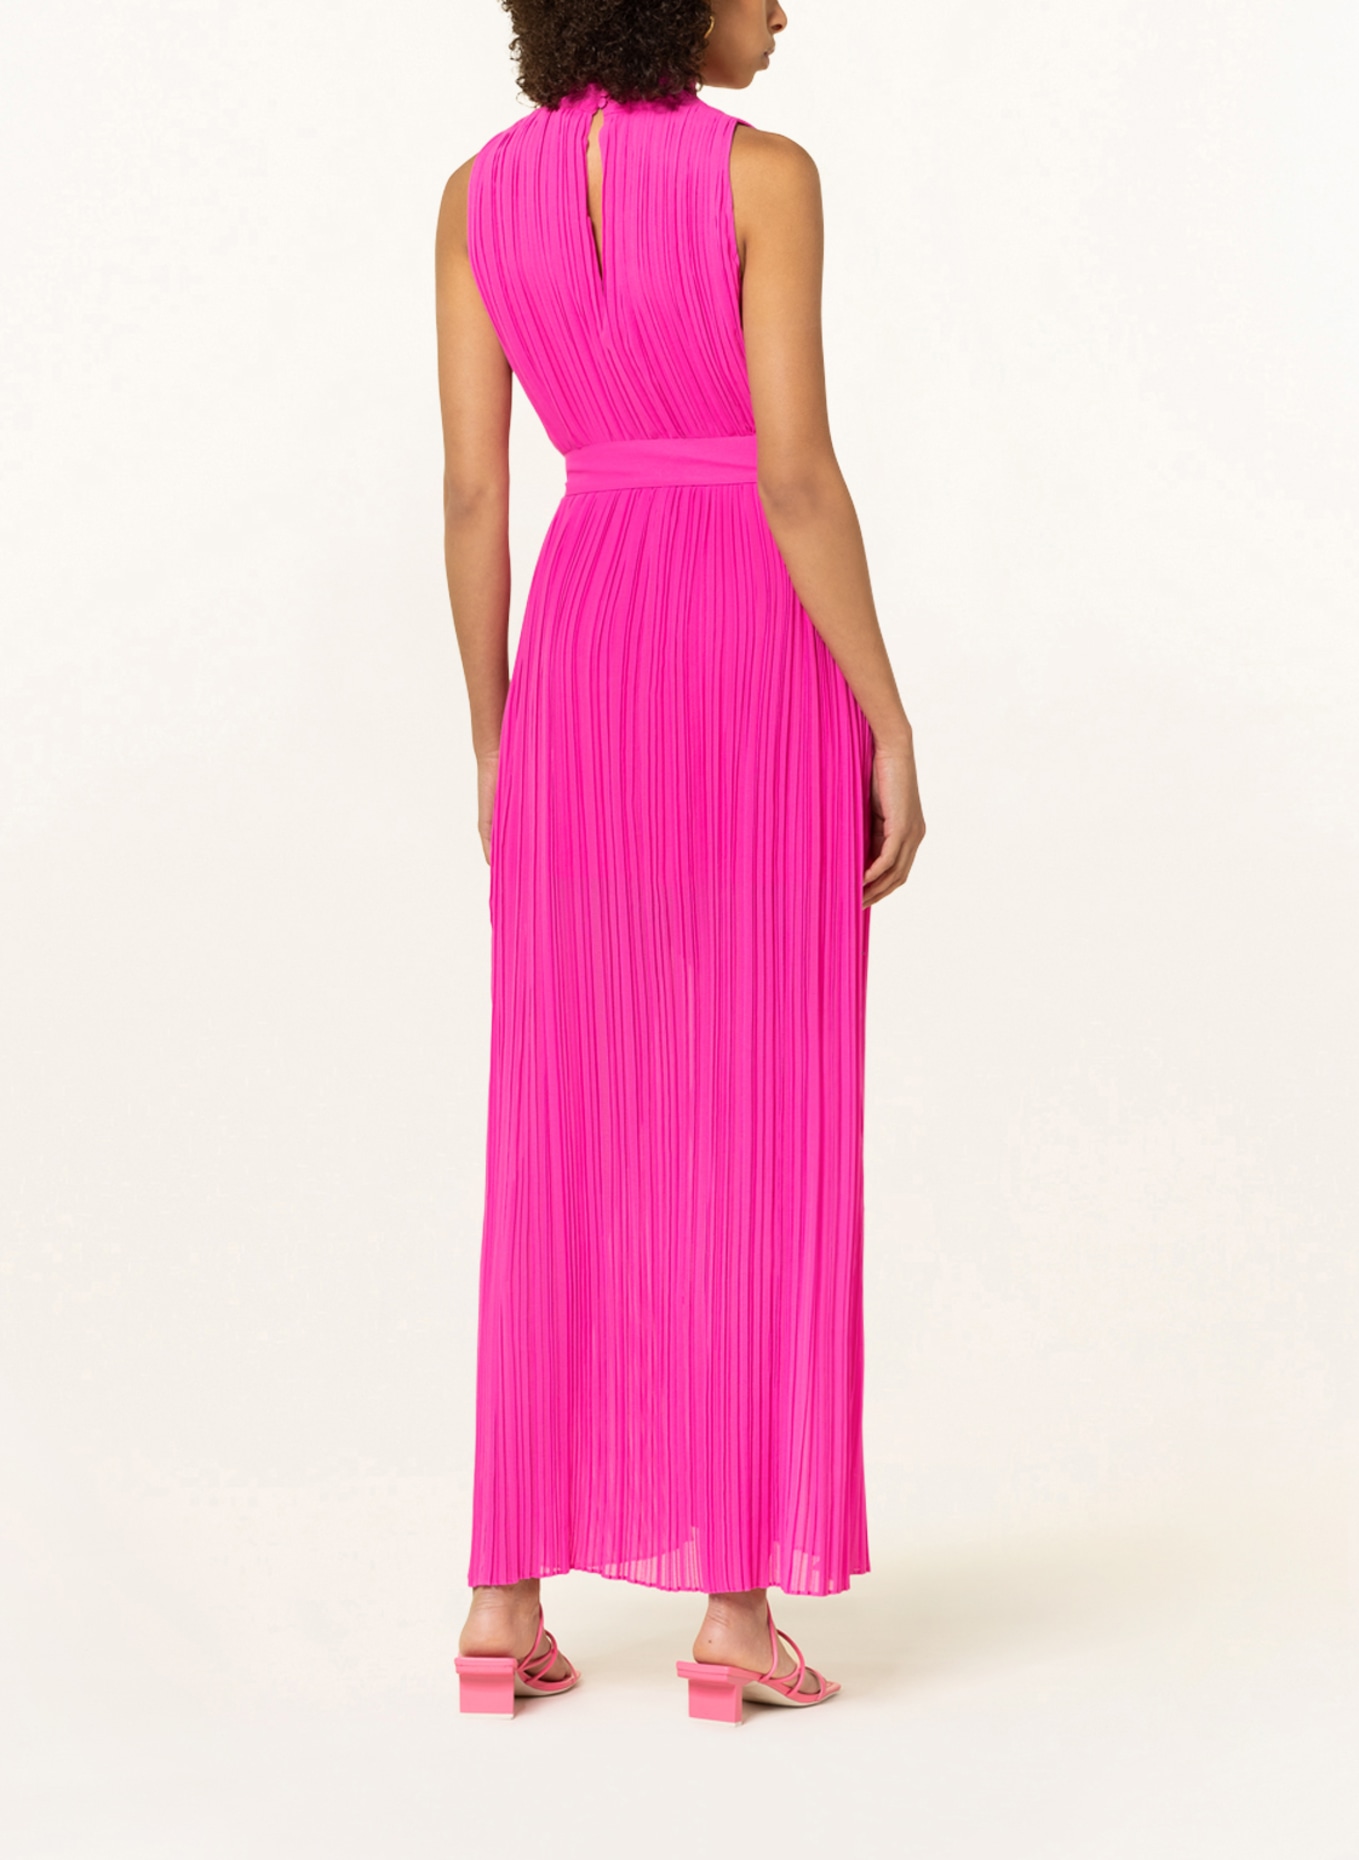 DANTE6 Pleated dress TRIXIE, Color: PINK (Image 3)